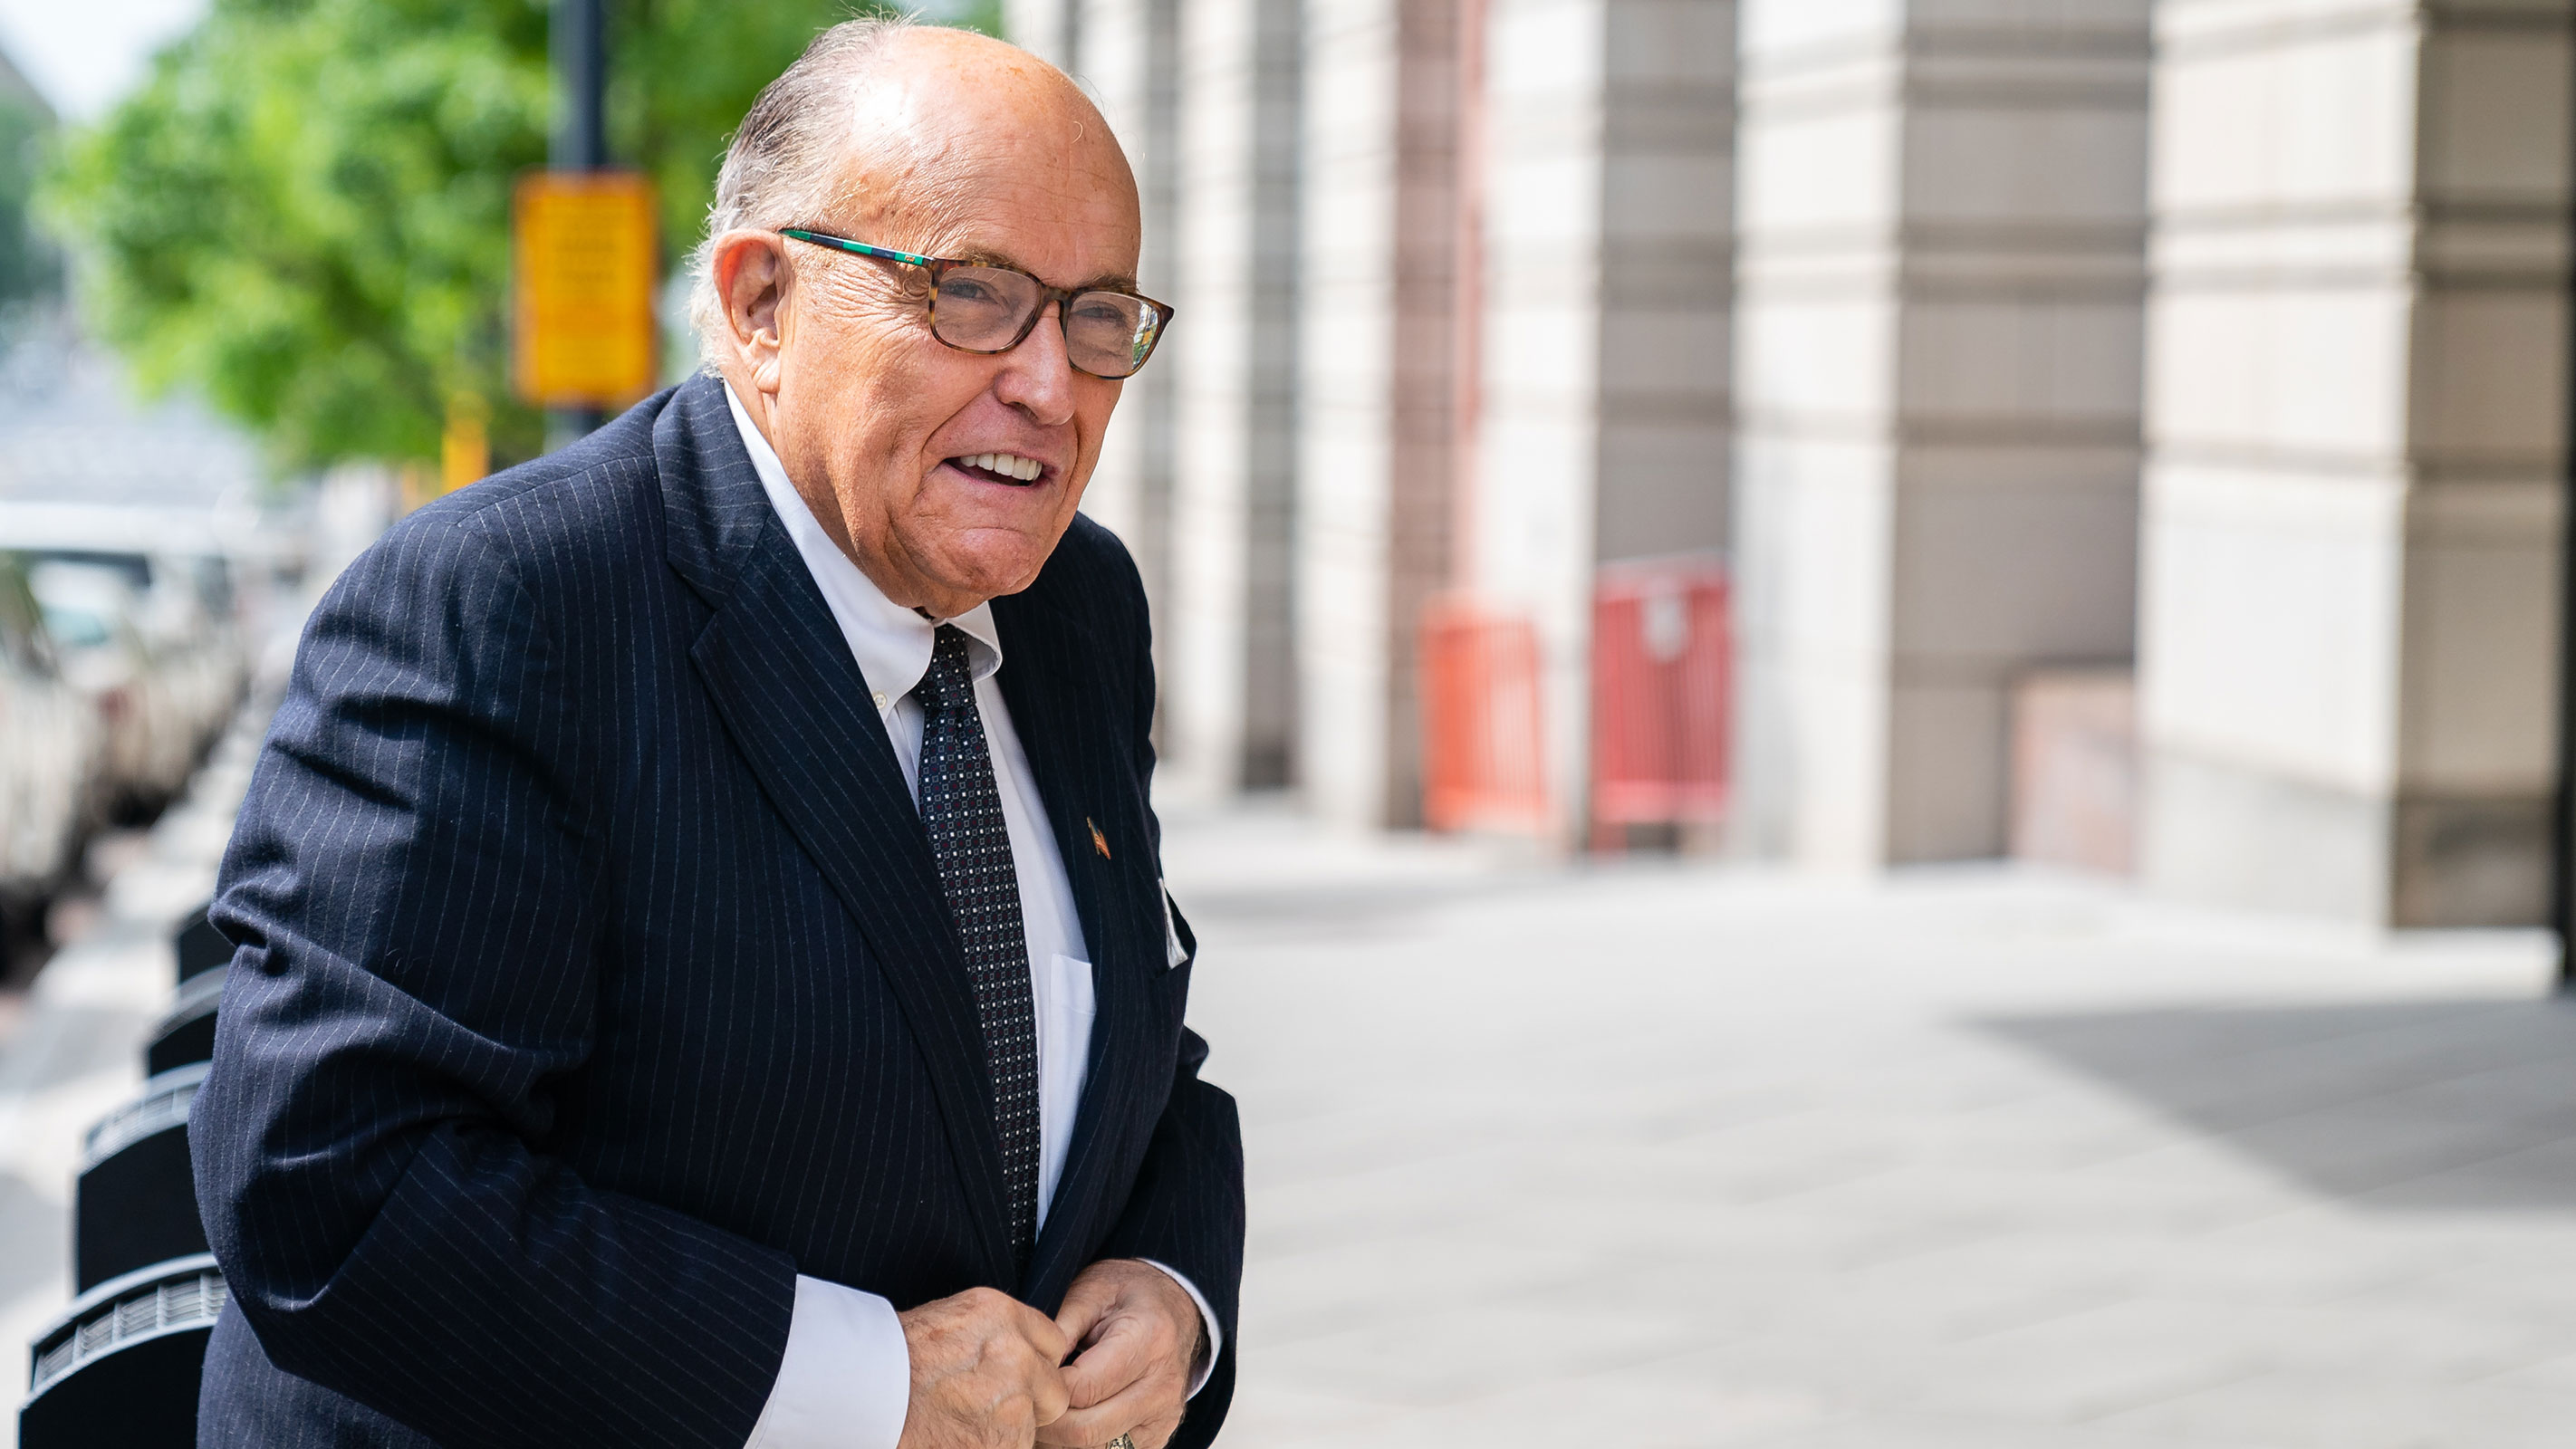 Rudy Giuliani, former lawyer to Donald Trump, arrives at federal court in Washington, DC, on Friday, May 19, 2023.